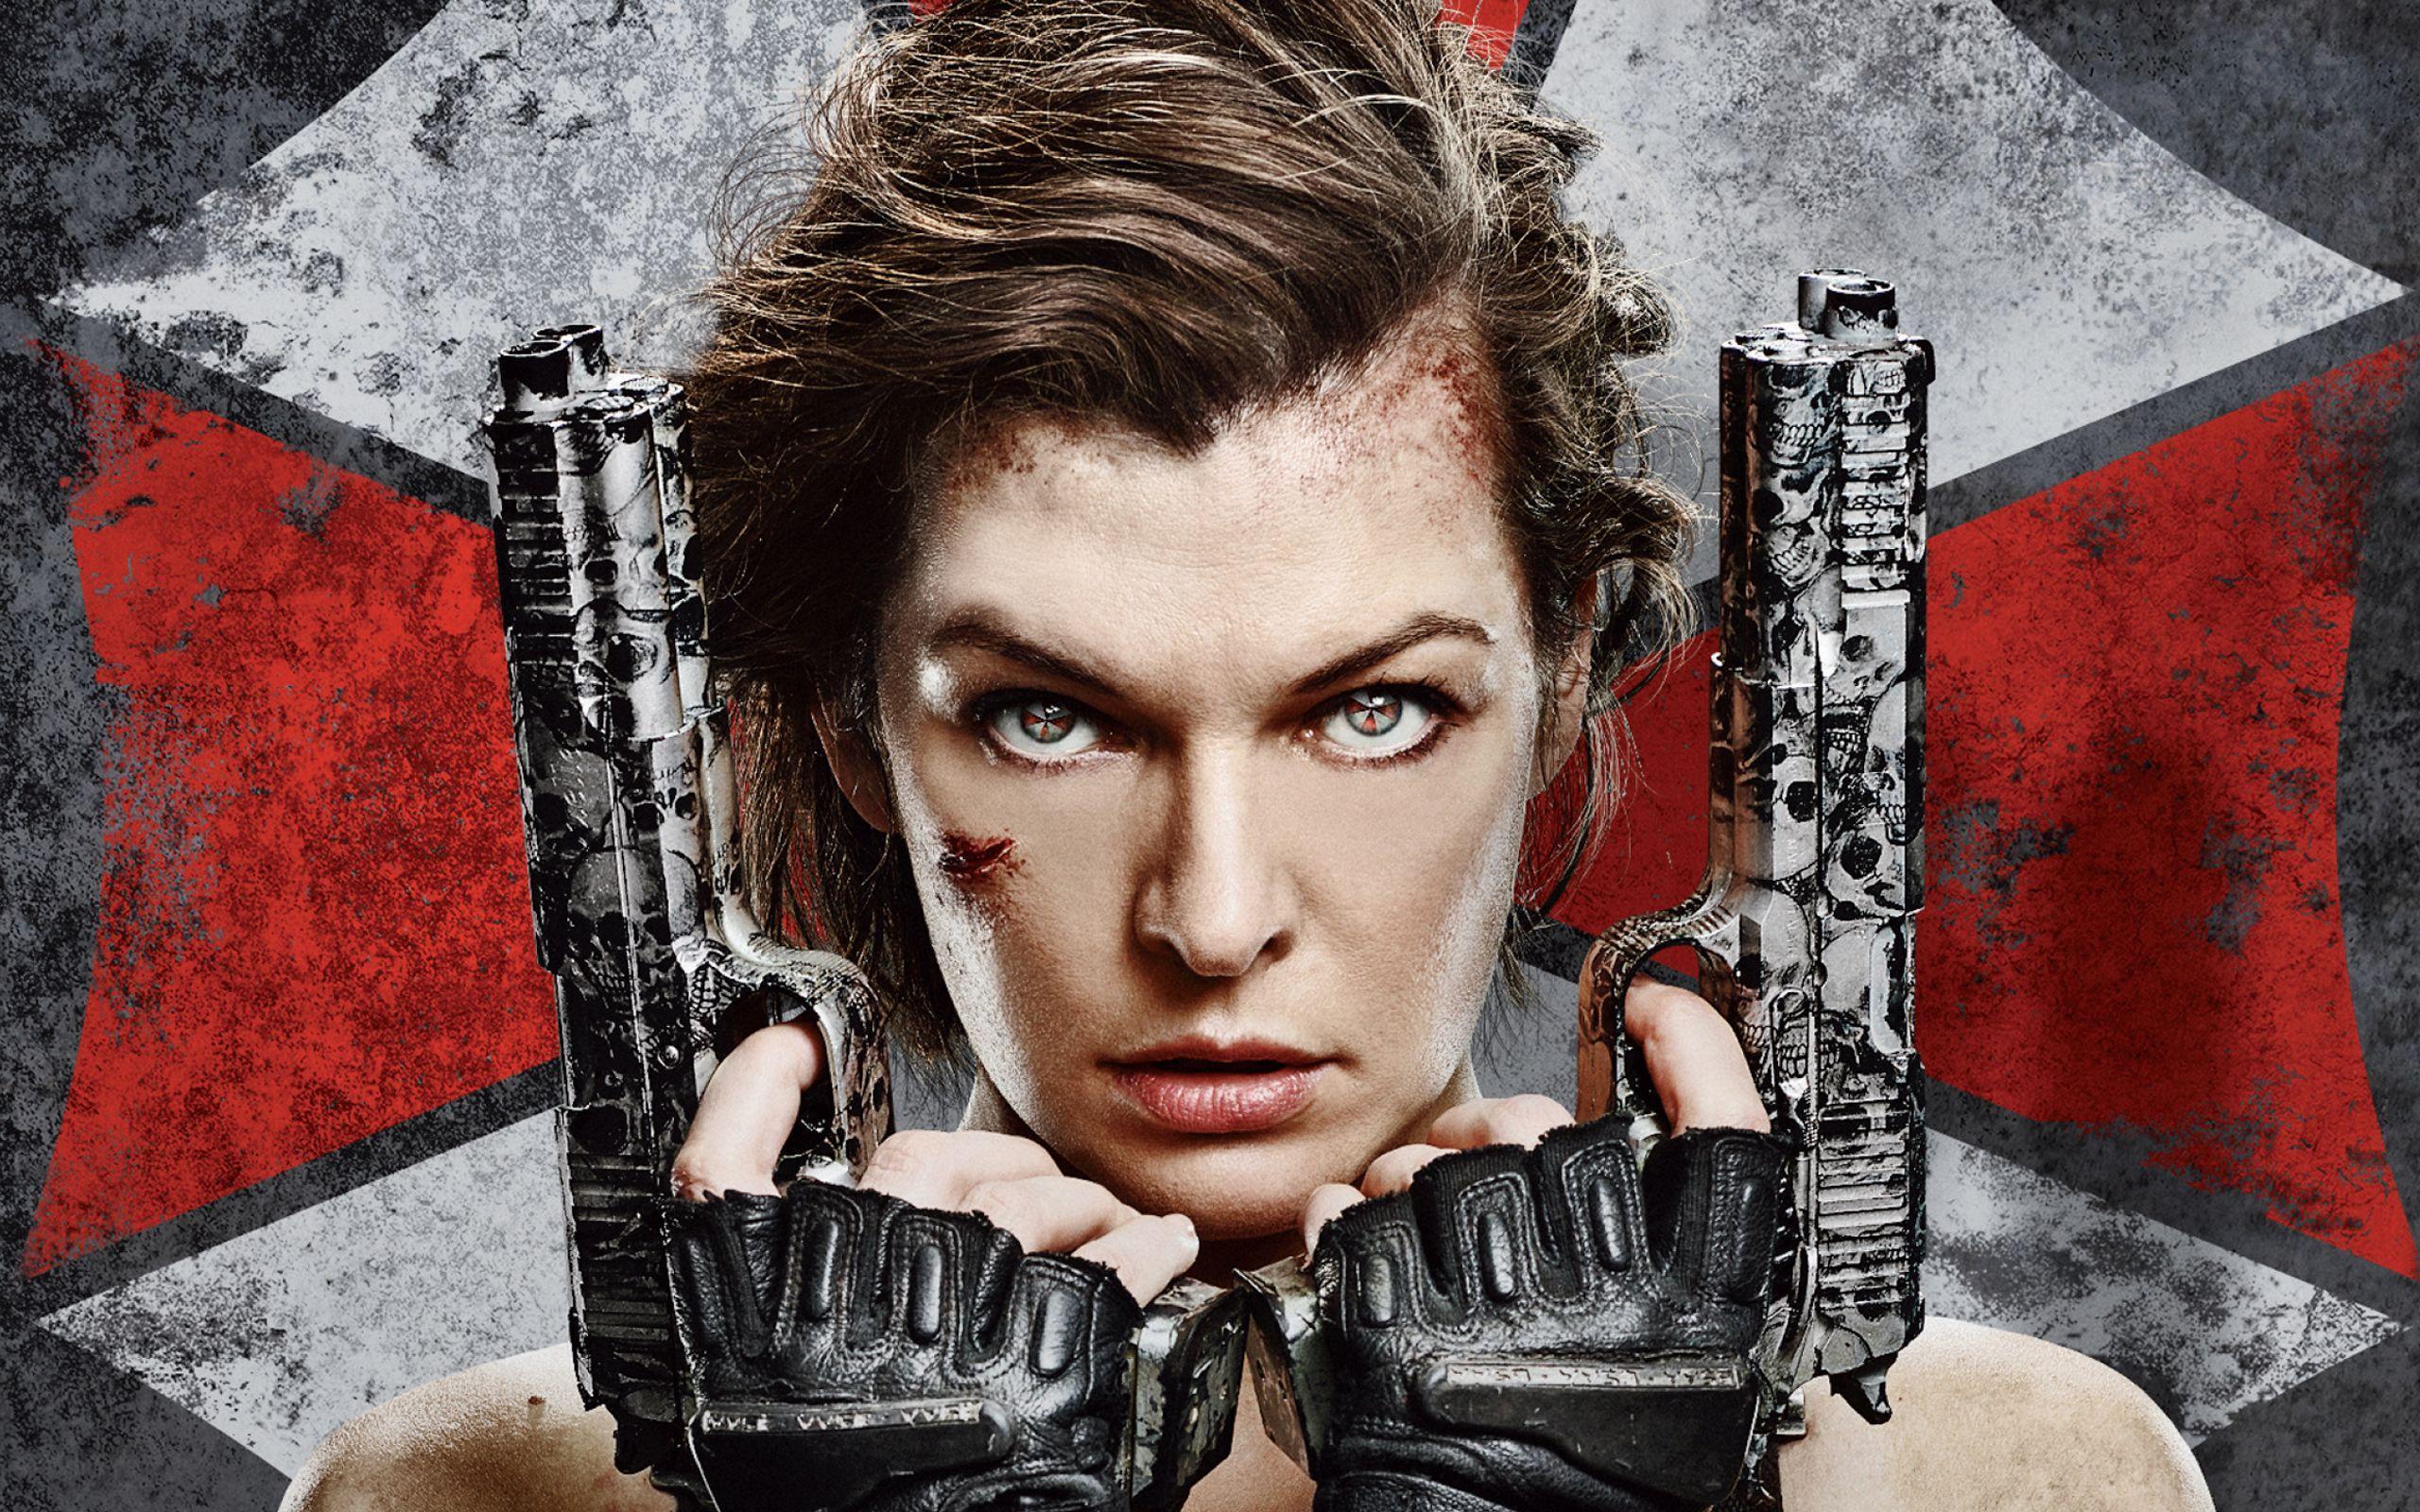 Resident Evil: The Final Chapter HD Wallpaper. Background